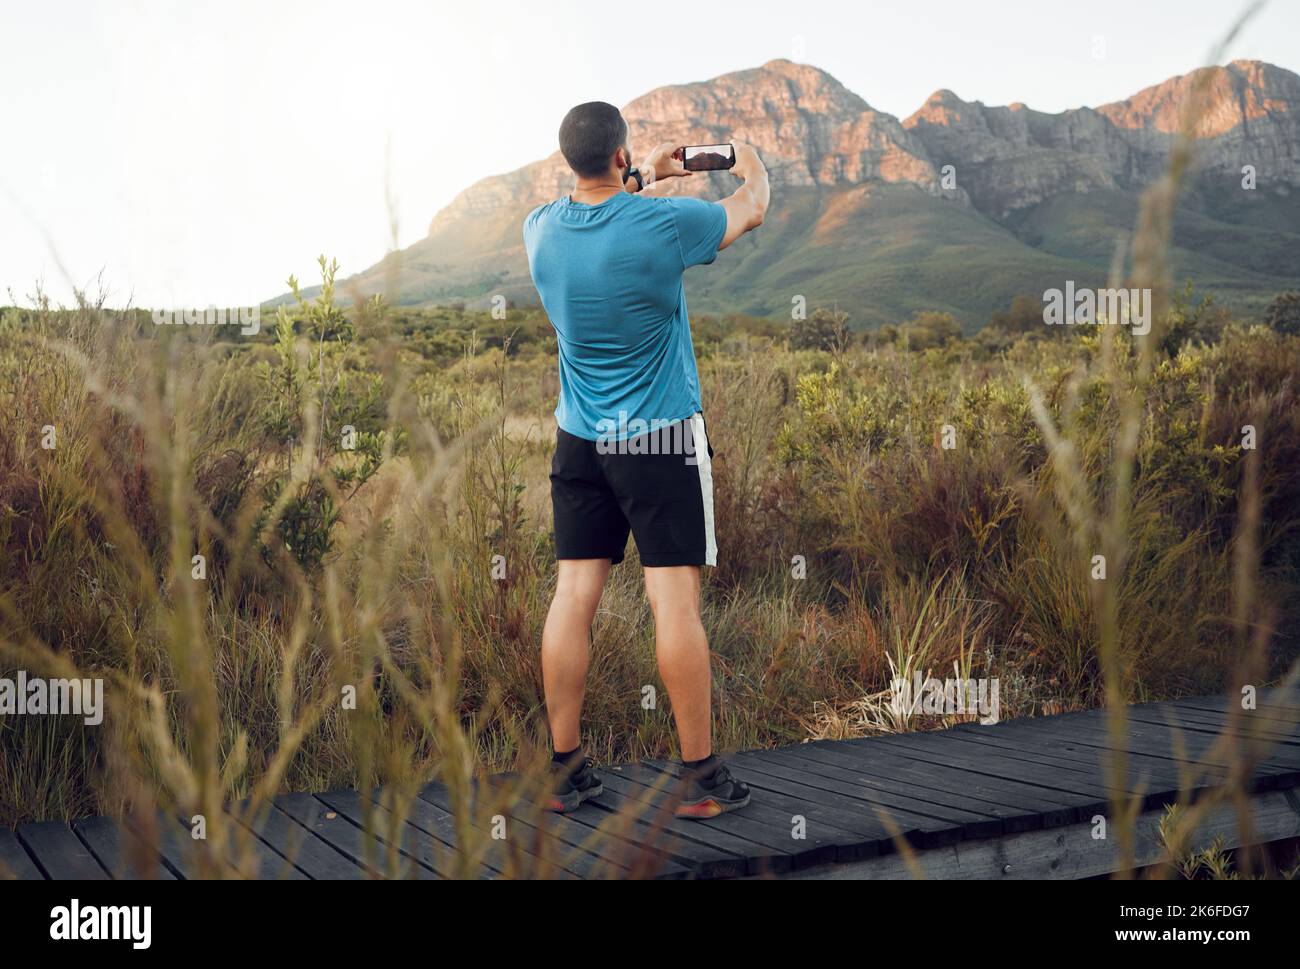 Phone, nature and fitness with a man taking a photograph while out for a sports run in the wilderness with a view. Exercise, training and workout with Stock Photo